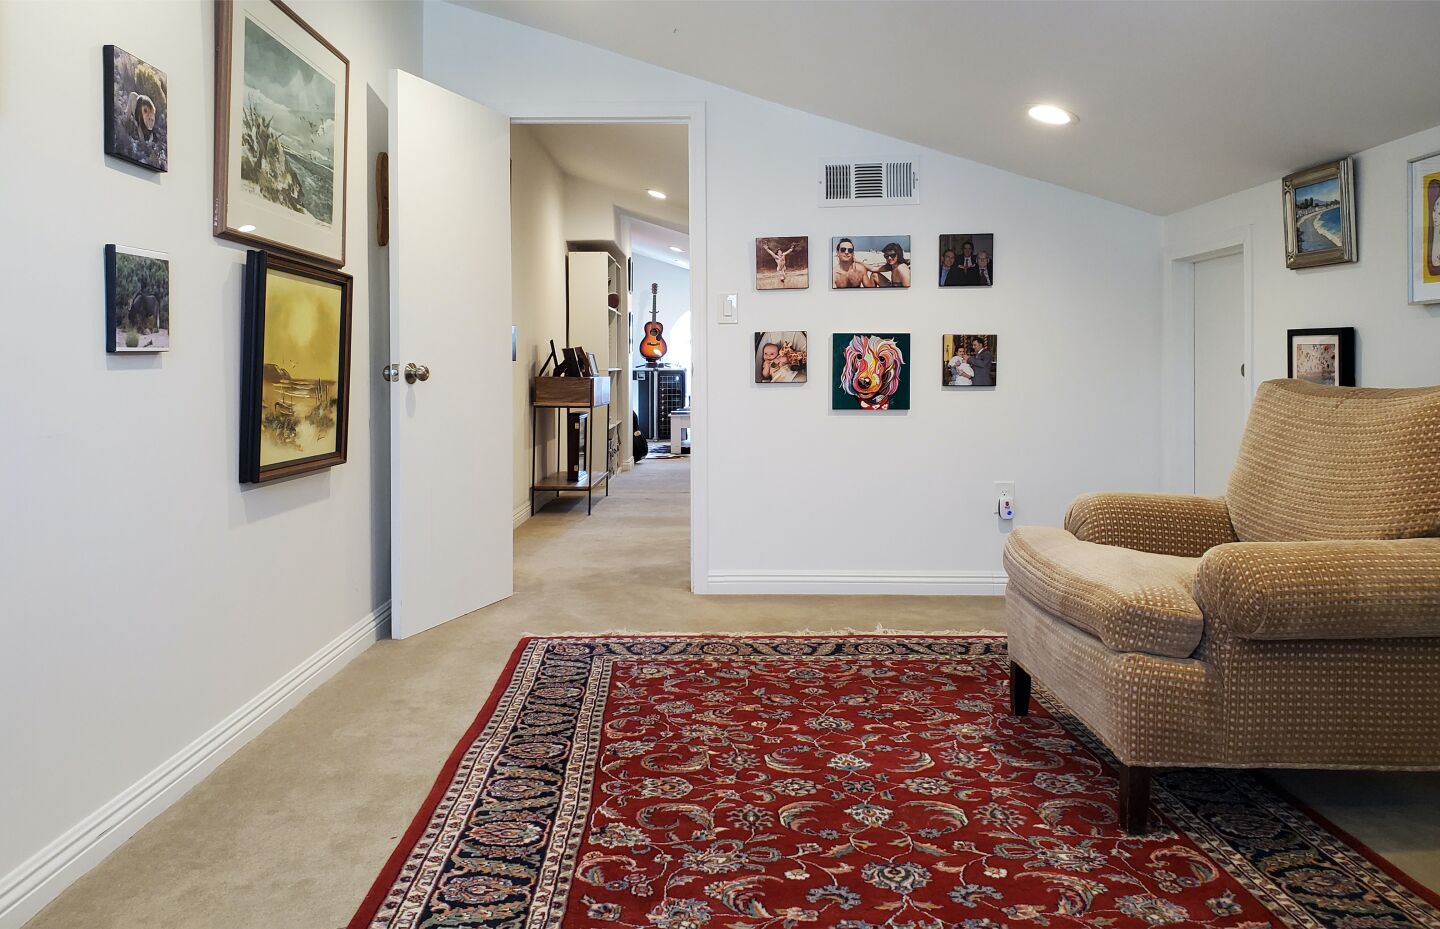 The attic has a furnished room with a rug.